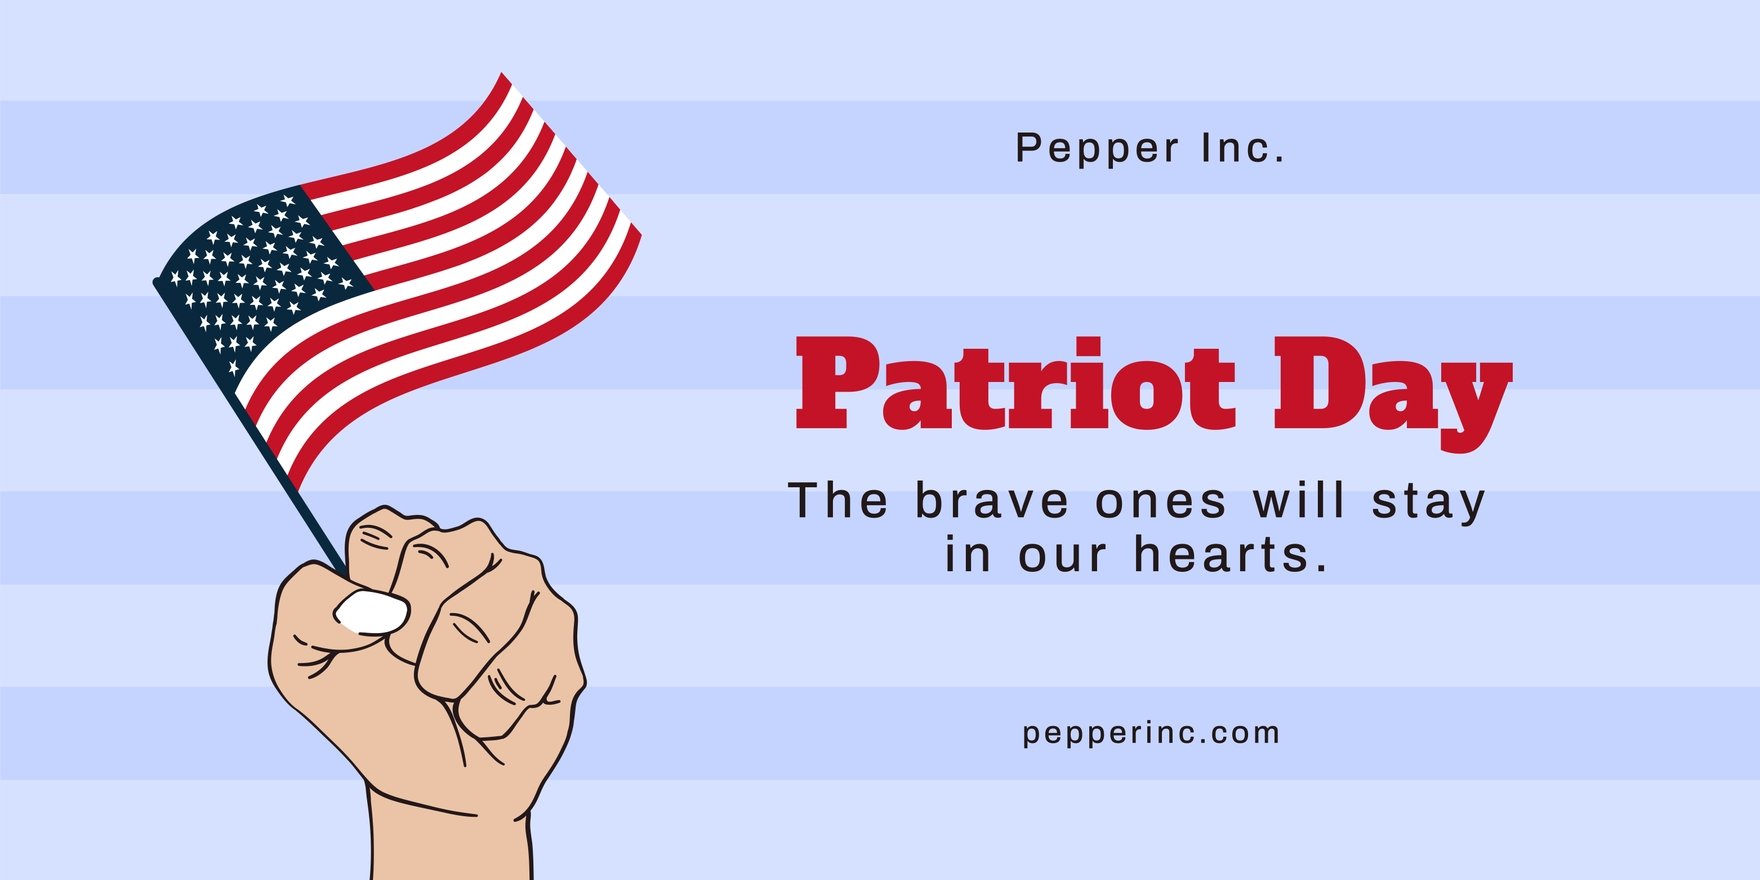 Patriot Day Banner With Usa Flag in Word, Google Docs, Illustrator, PSD, Apple Pages, Publisher